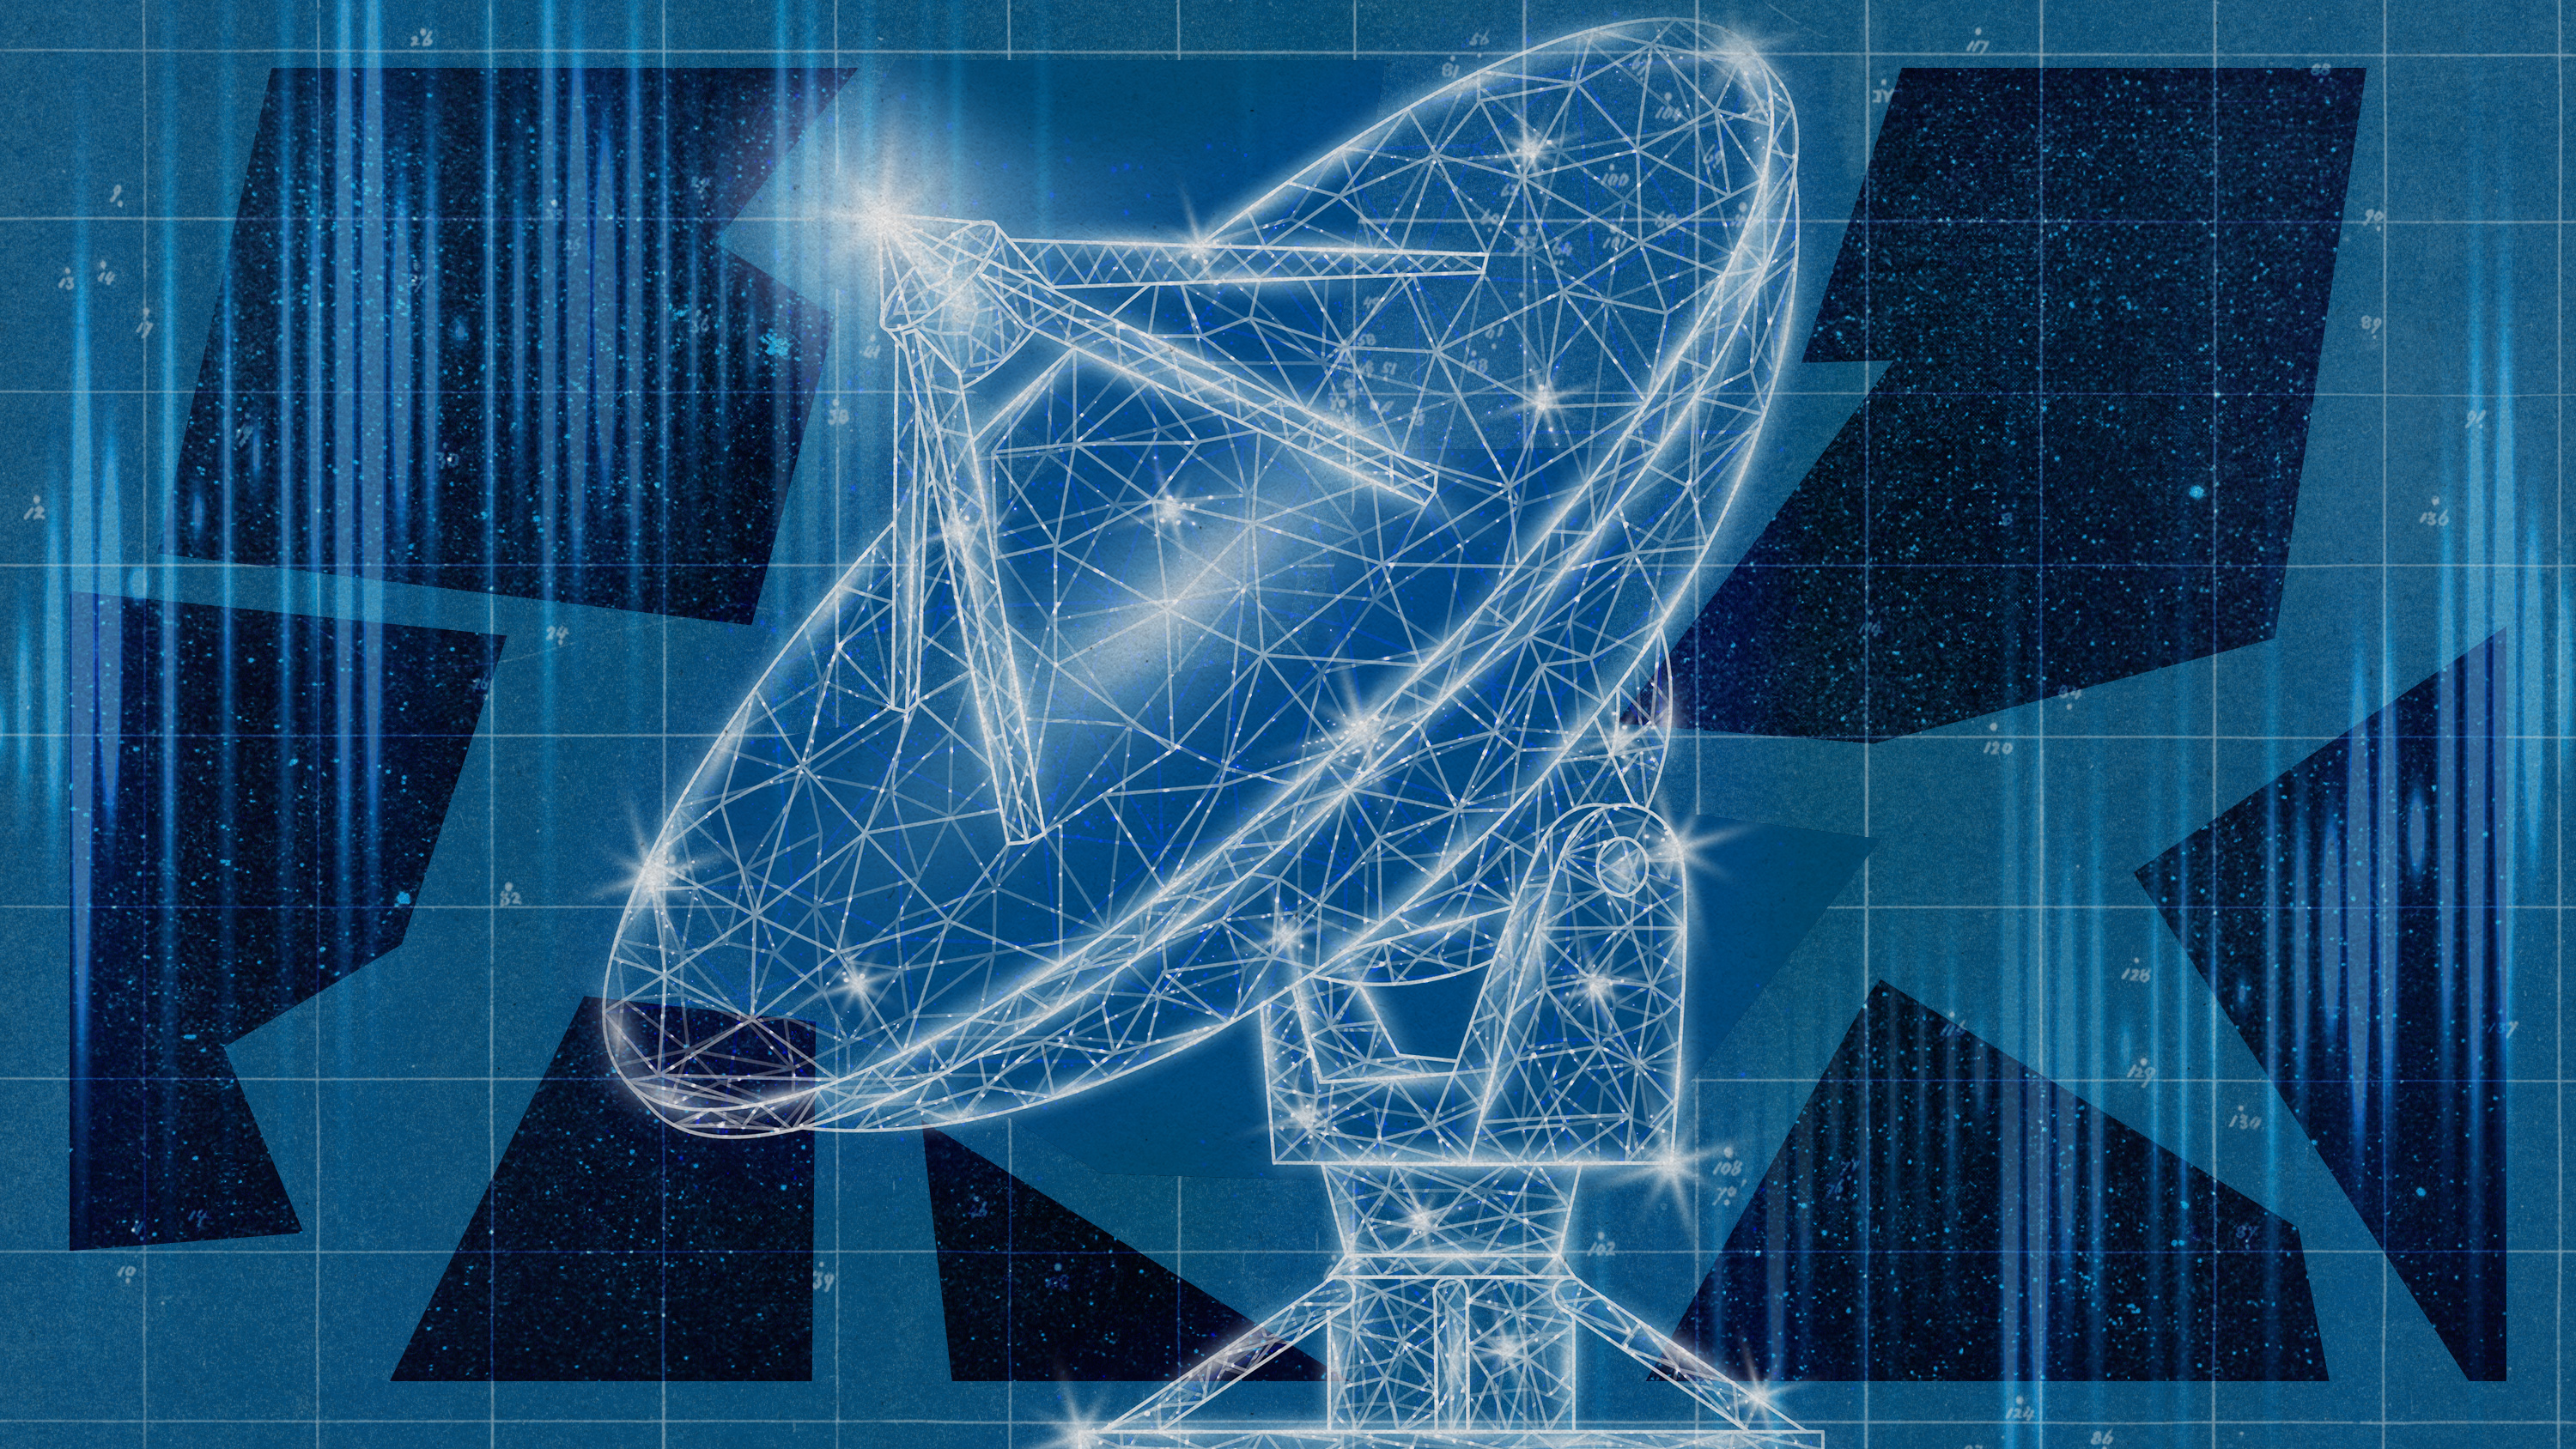 A photo illustration collage showing a radio telescope with a fragmented background of space and radio waves.